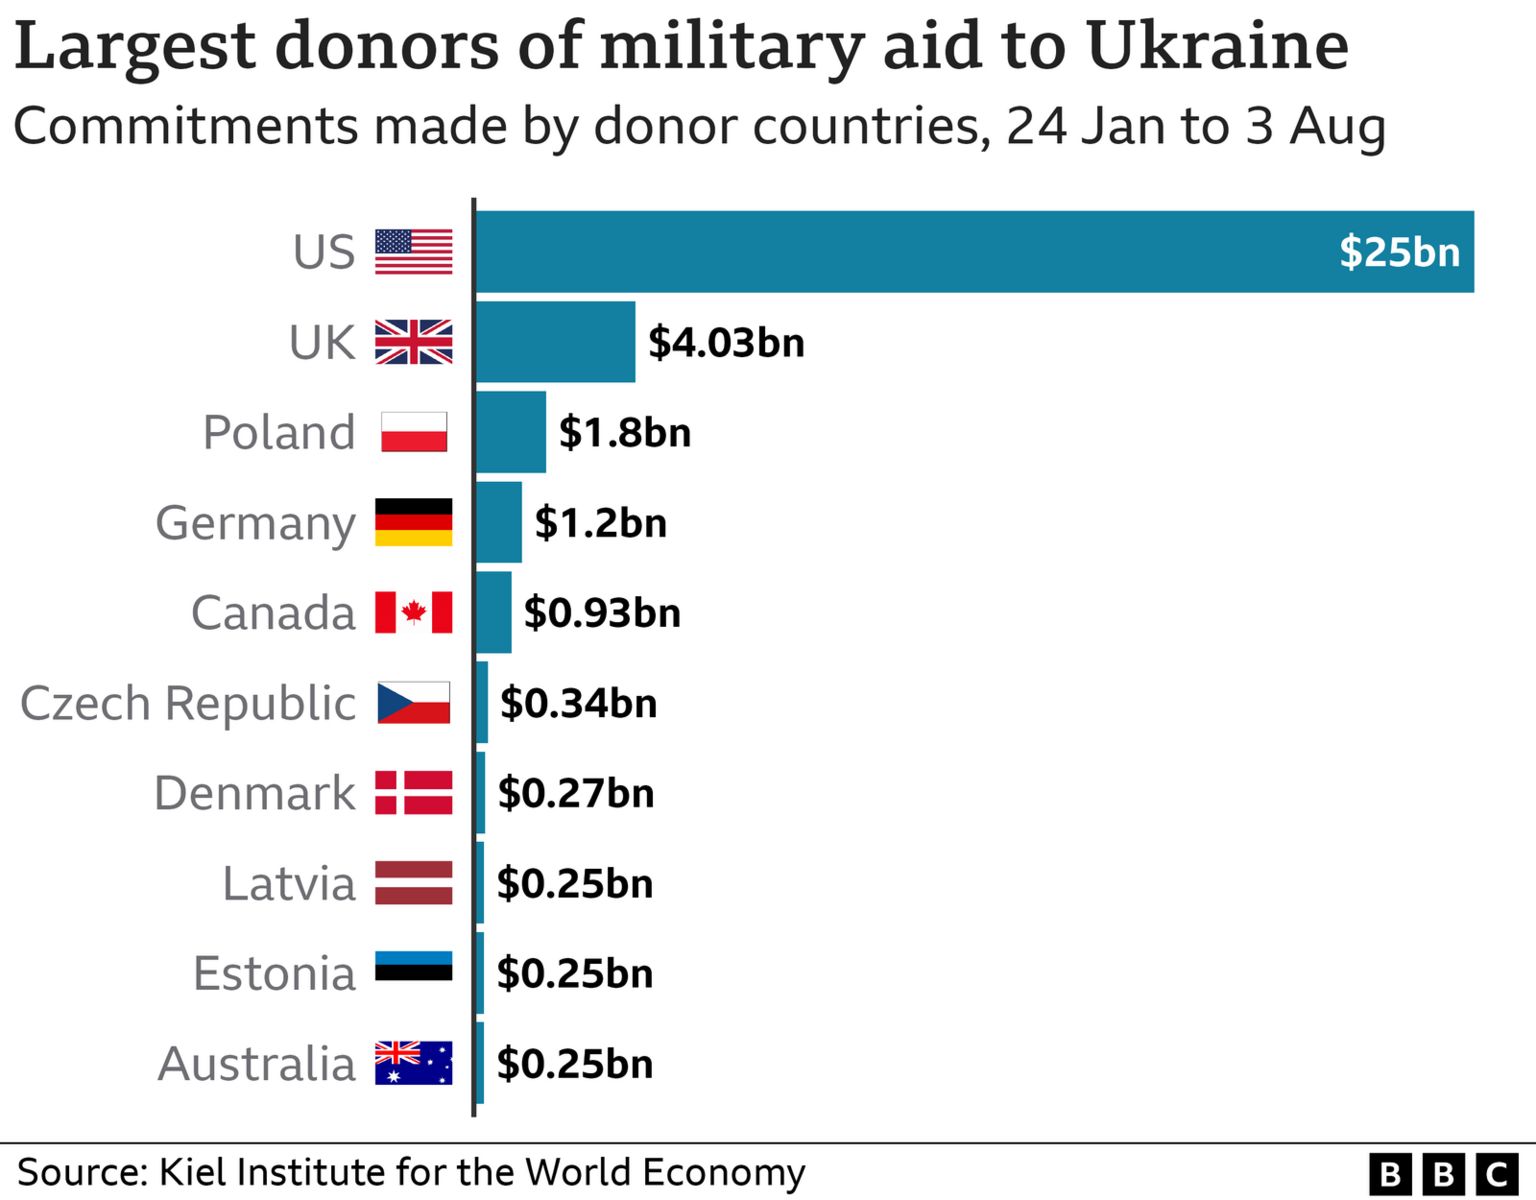 Image shows military donations to